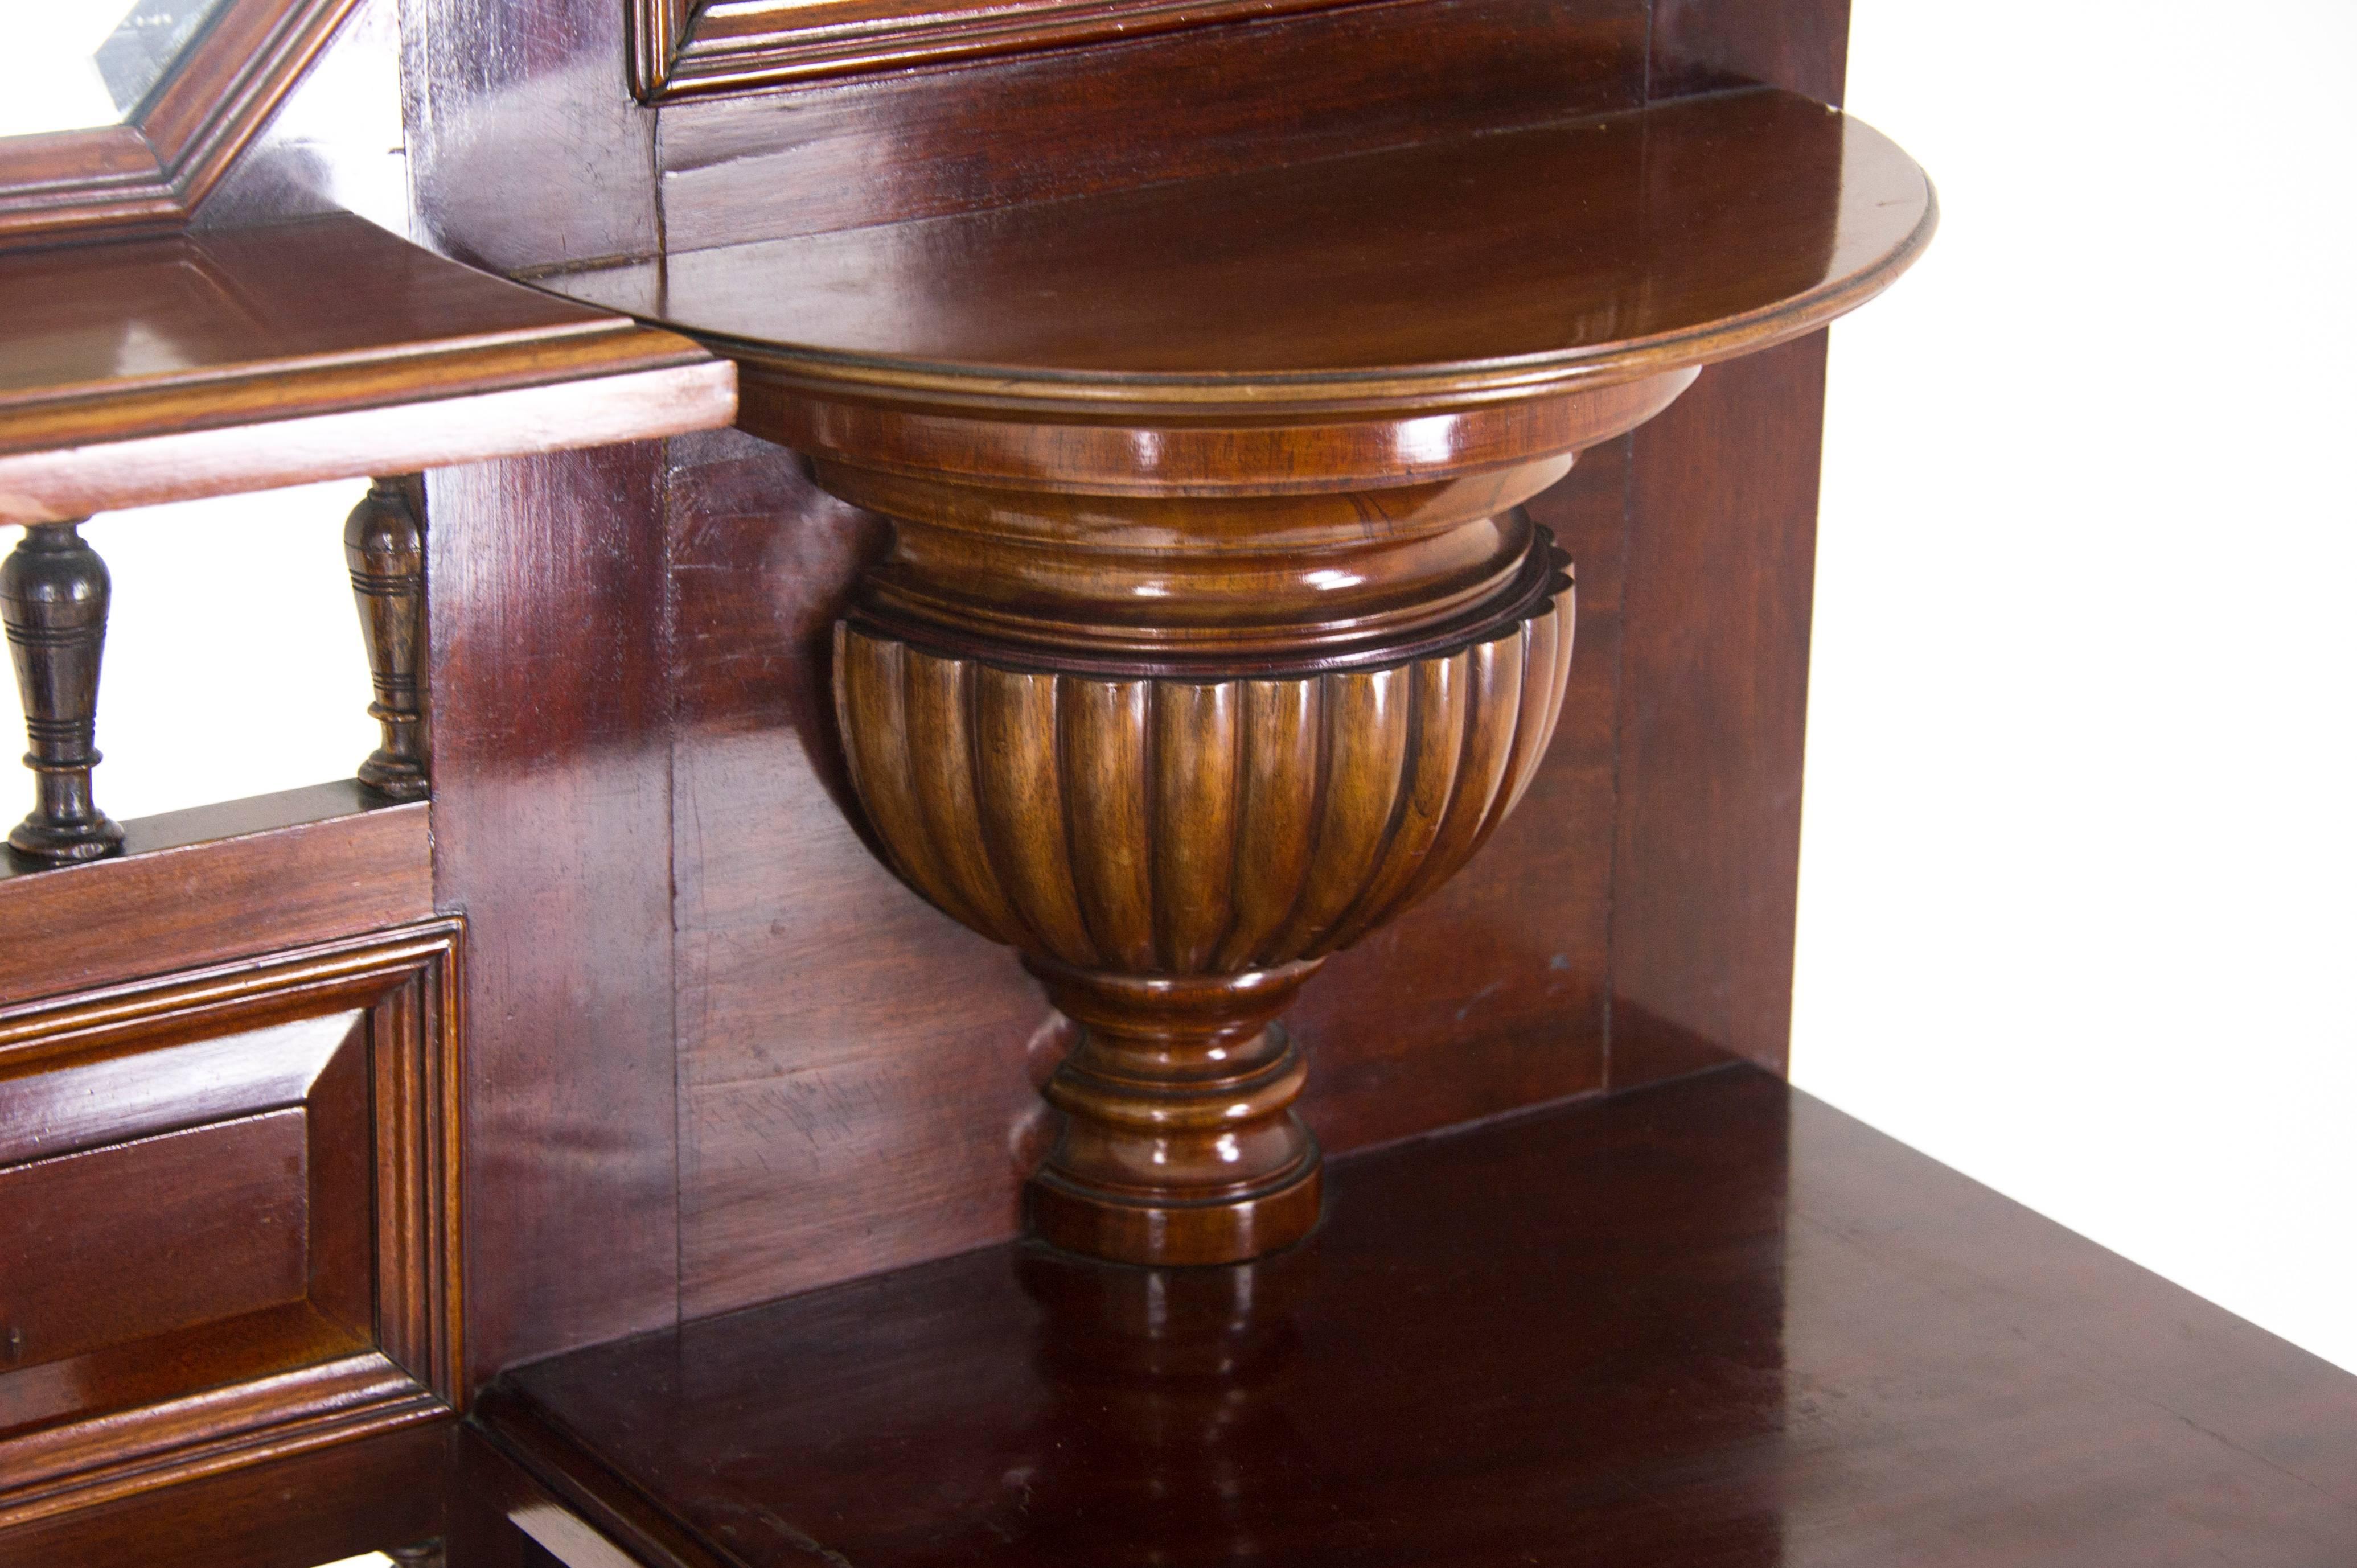 Scotland, 1910
Solid Mahogany
Original Finish
Dentil Cornice Above
Paneled Back with Central Beveled Mirror
Original Art Nouveau Hooks
Two Shelves Below
Central Umbrella Stand, Flanked by Two Drawers
Ending on Turned Legs
Open Shelf with Two